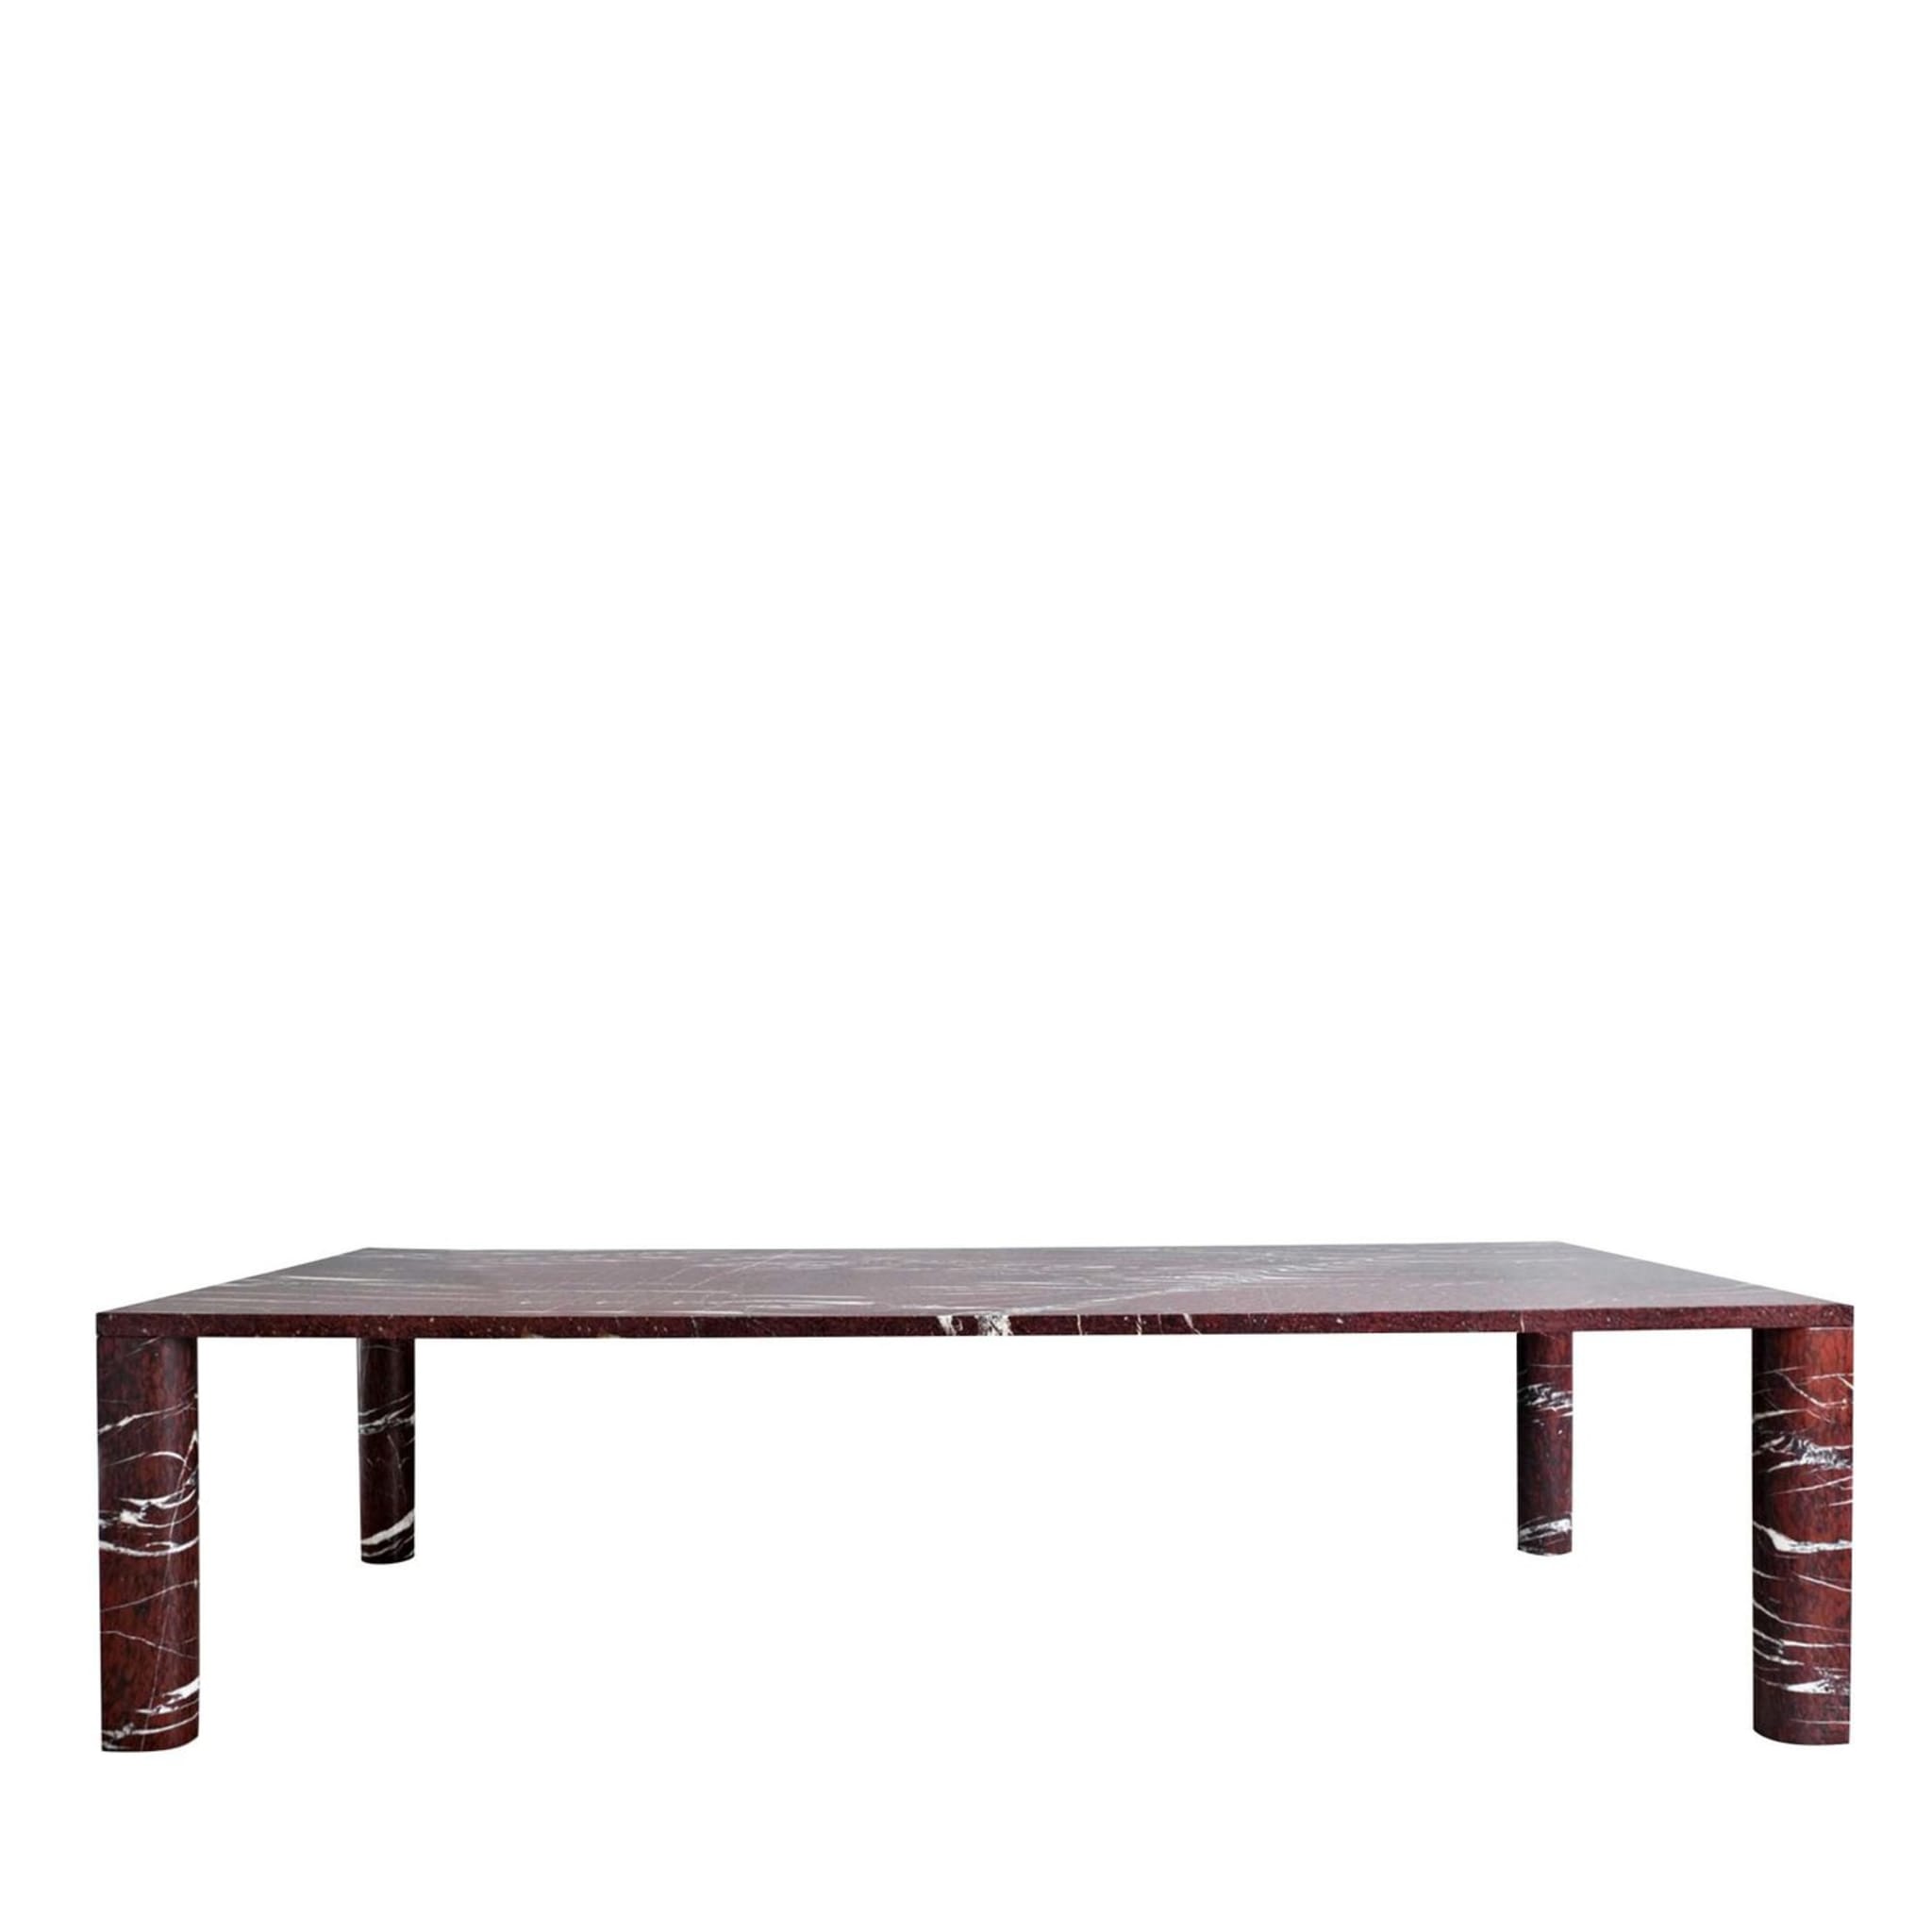 Rouge du Roi Dining Table Lovemelovemenot by Michael Anastassiades - Main view